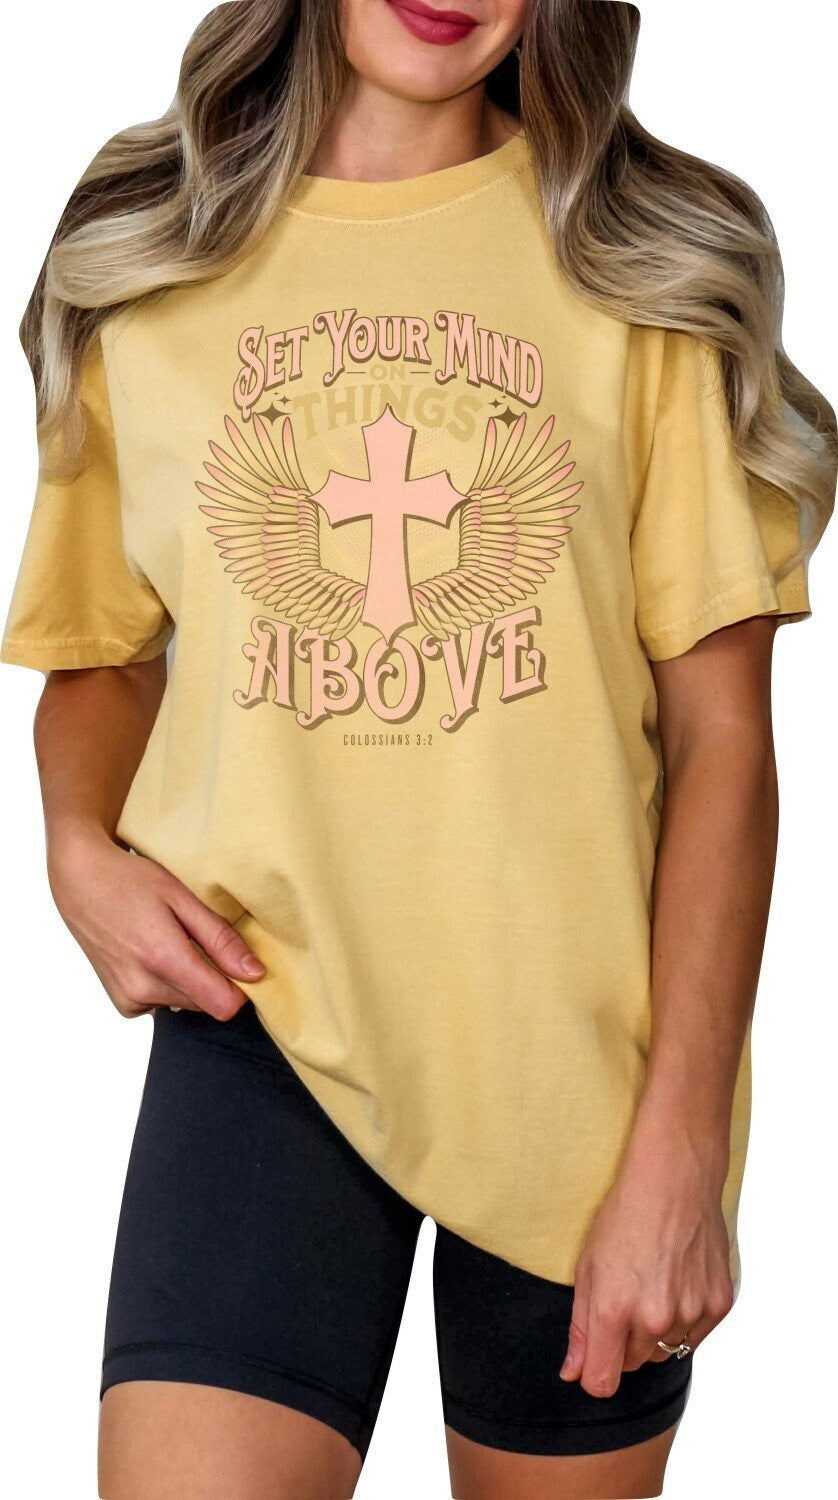 Christian Shirts Religious Tshirt Christian T Shirts Boho Christian Shirt Bible Verse Shirt Set Your Mind on Things Above Christian Shirt